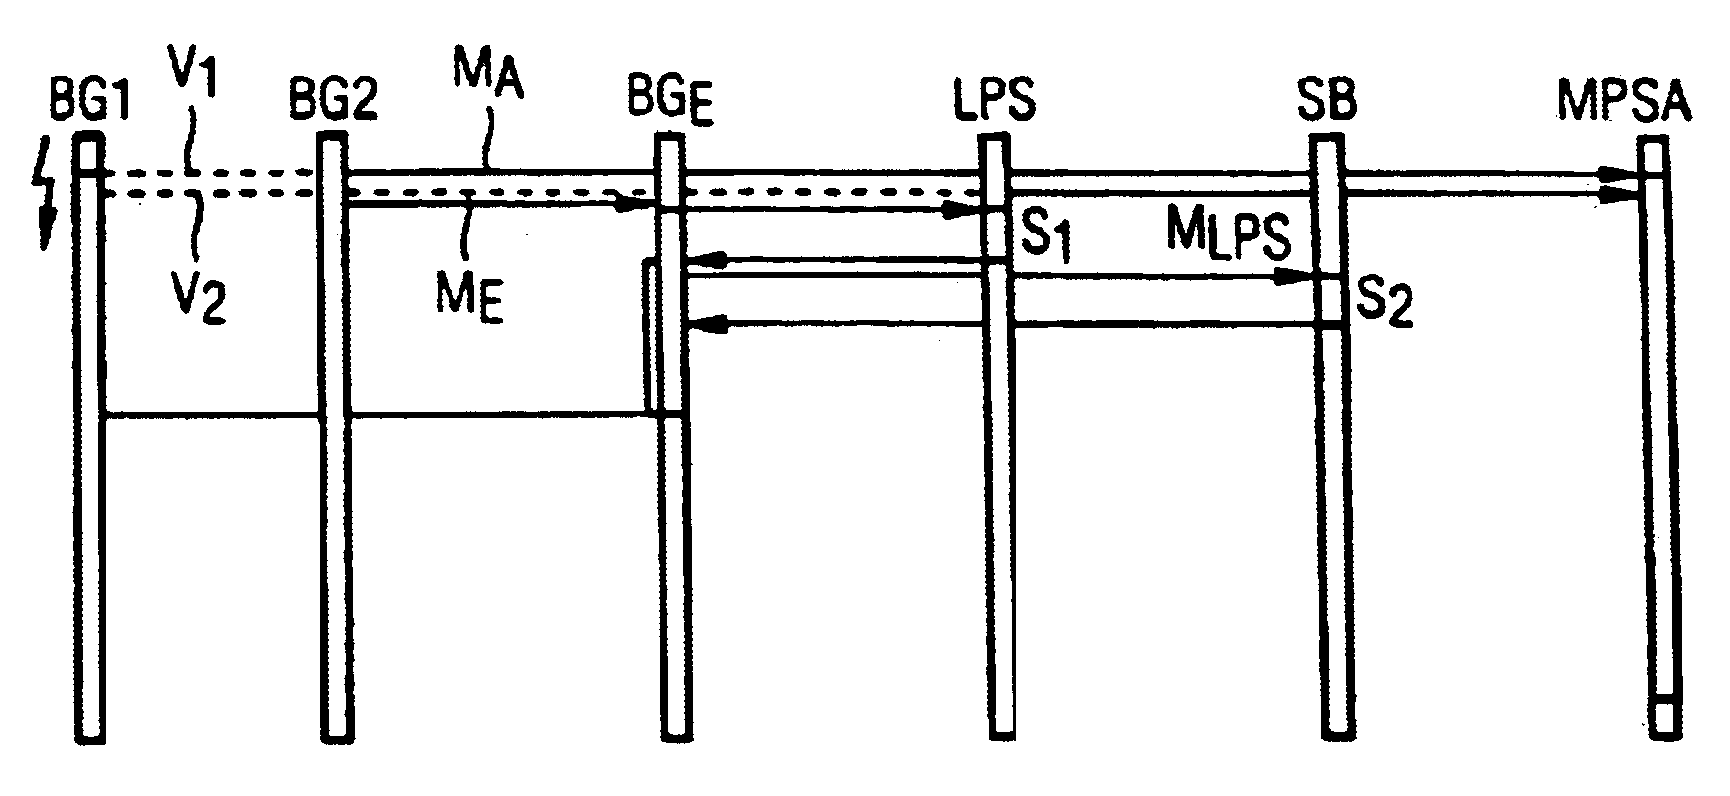 Method for equivalently connecting subassemblies in 1:N redundancy